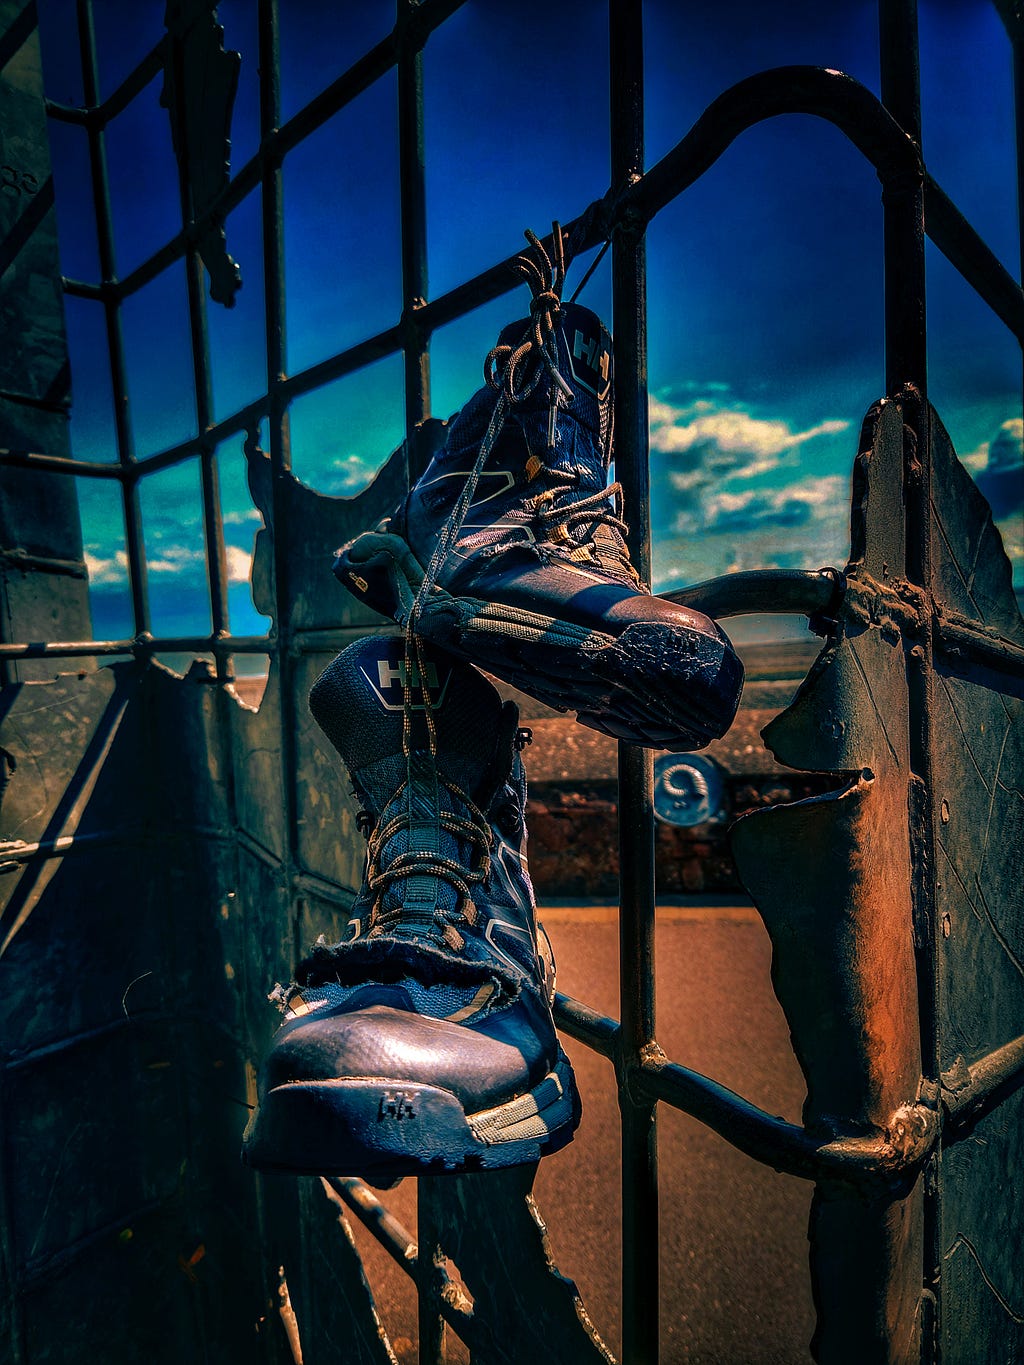 A pair of walking boots dangling from a monument